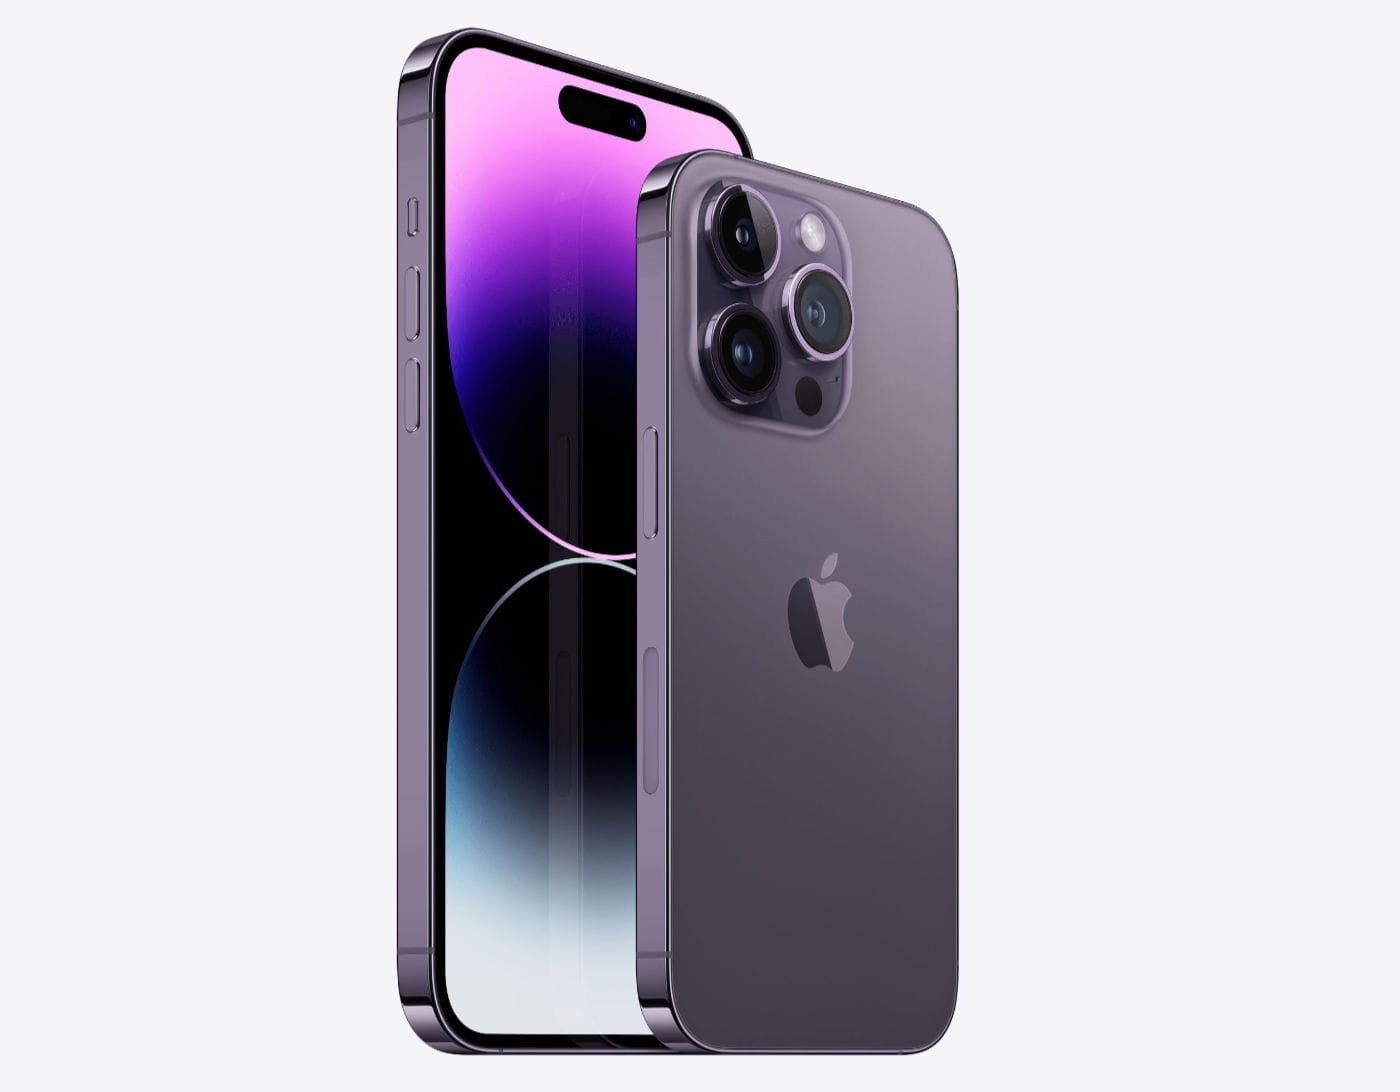 Iphone14pro sippeddeley